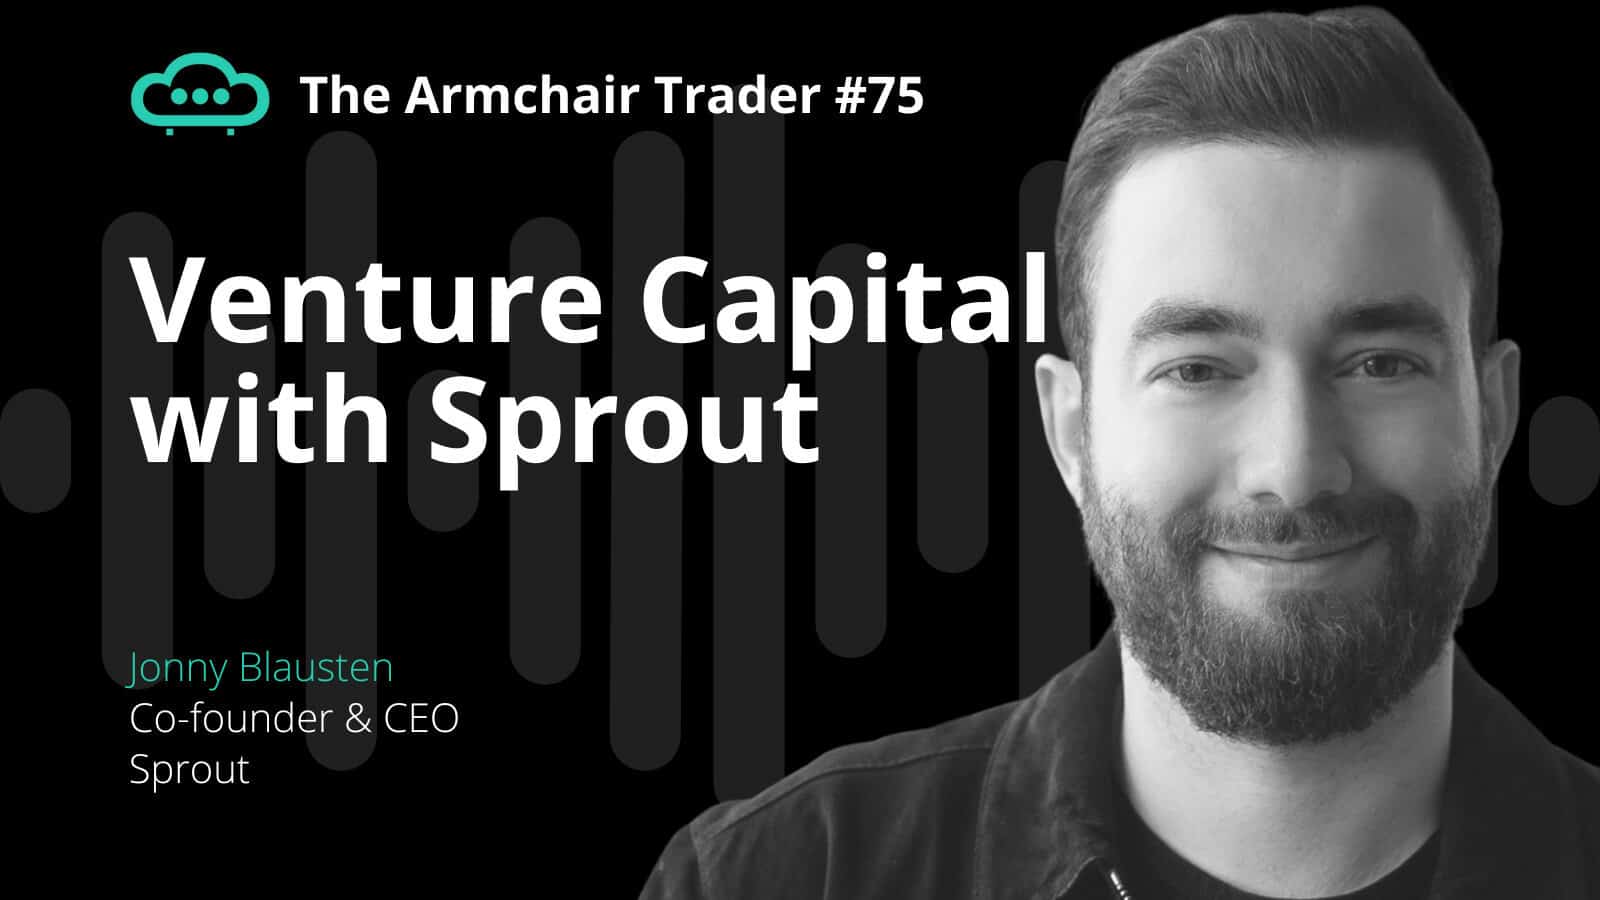 Podcast: Venture Capital with Sprout